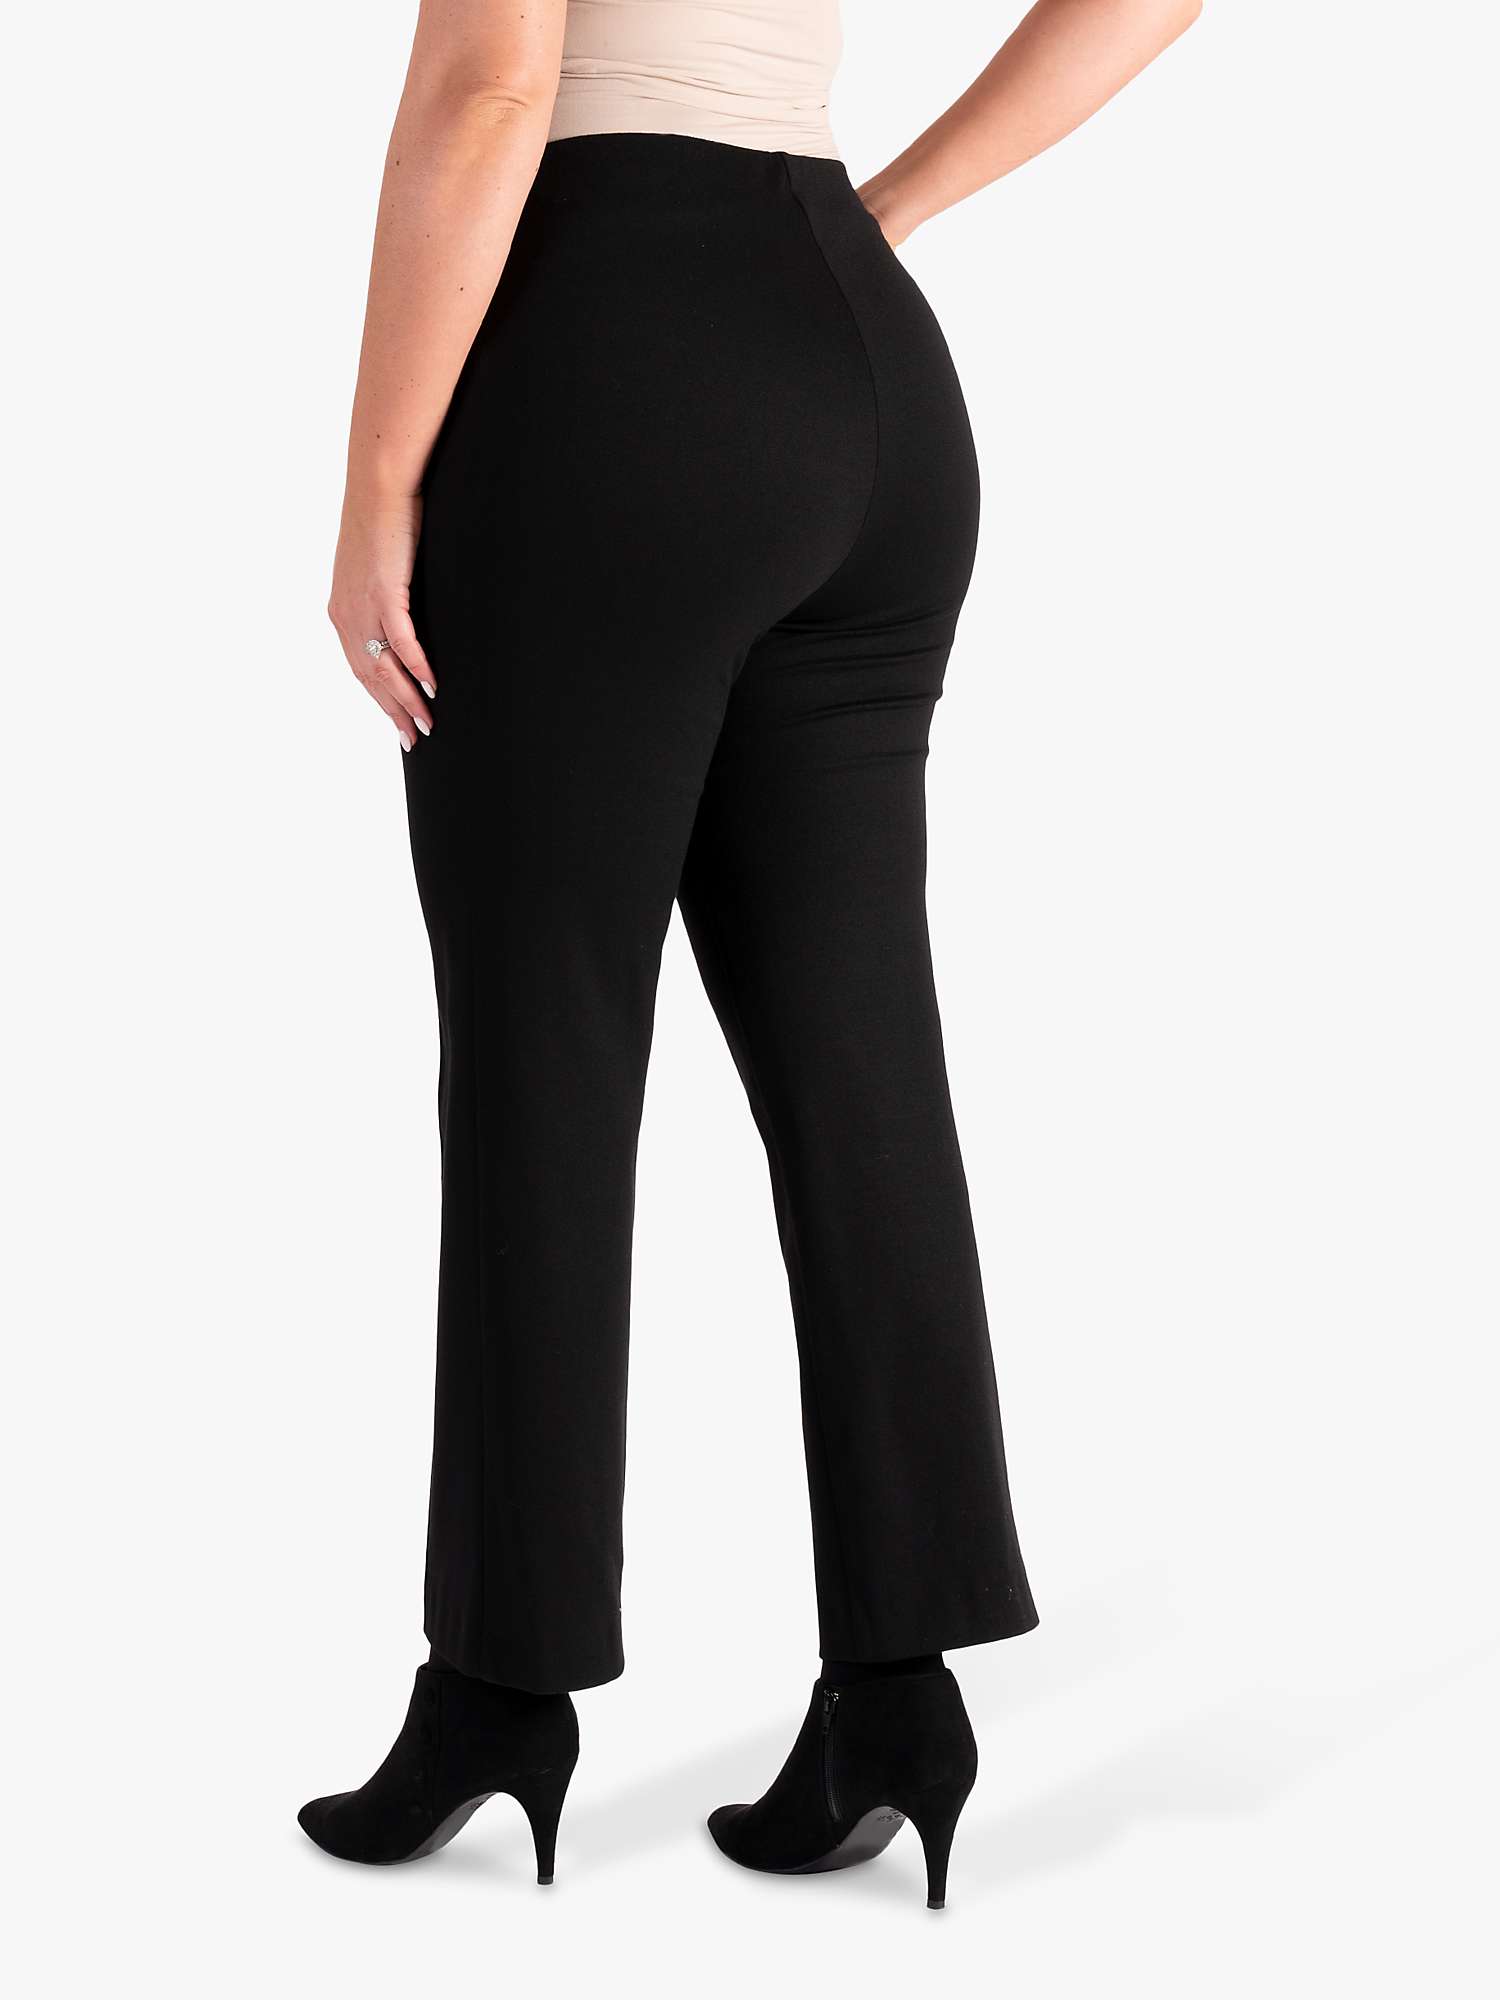 Buy chesca Ponte Roma Straight Leg Trousers, Black Online at johnlewis.com